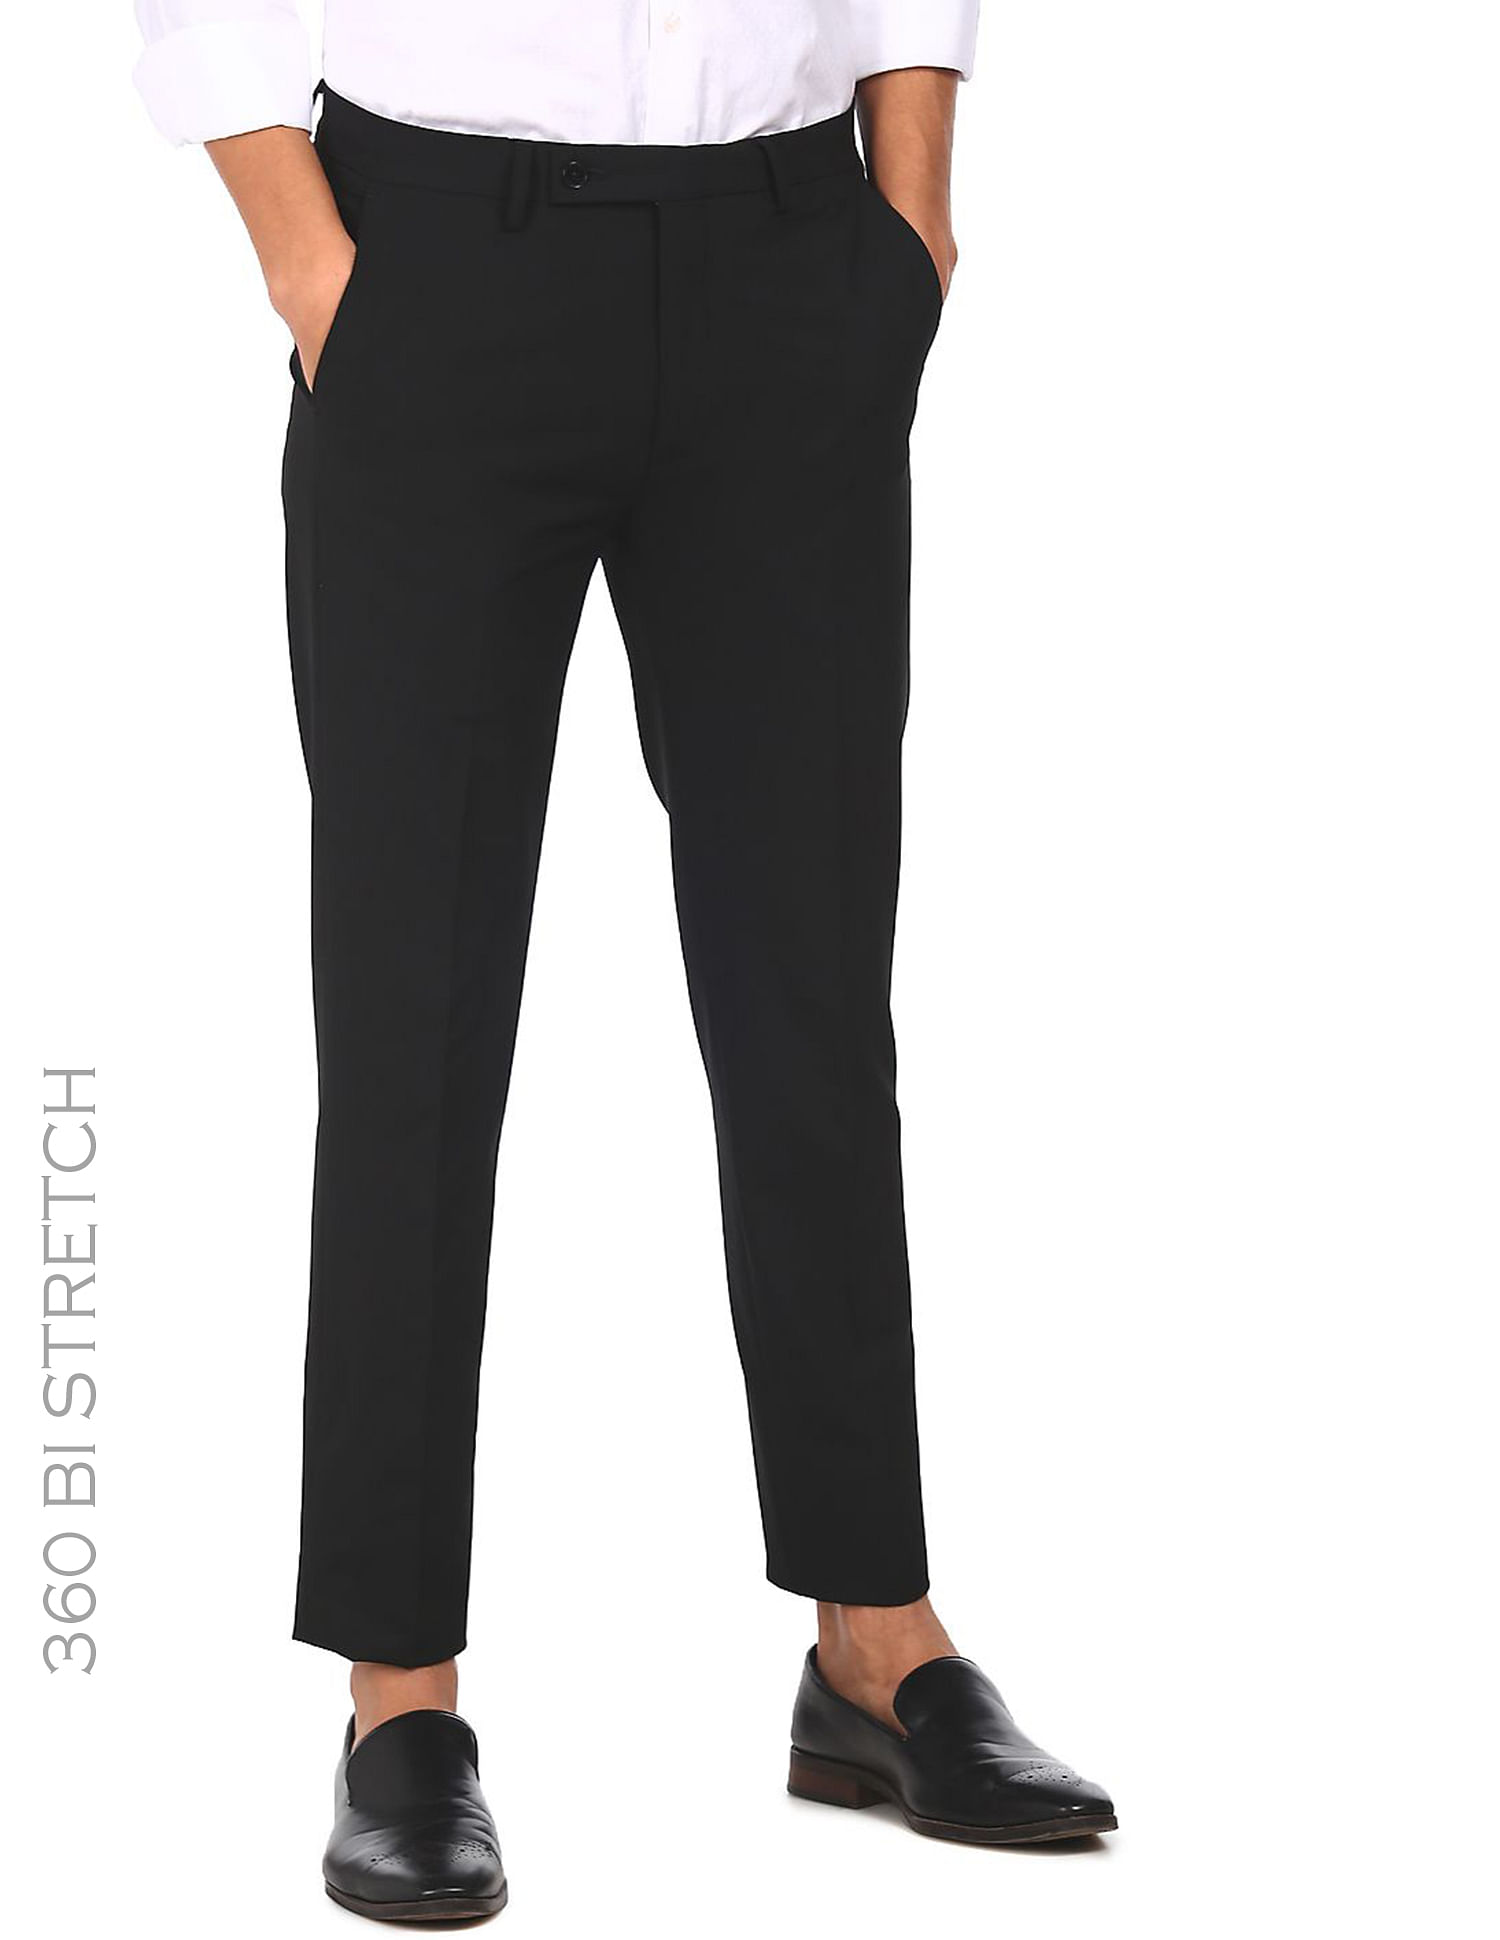 Buy Arrow Newyork Solid Super Slim Fit Elasticated Twill Formal Trouser  Black at Amazon.in